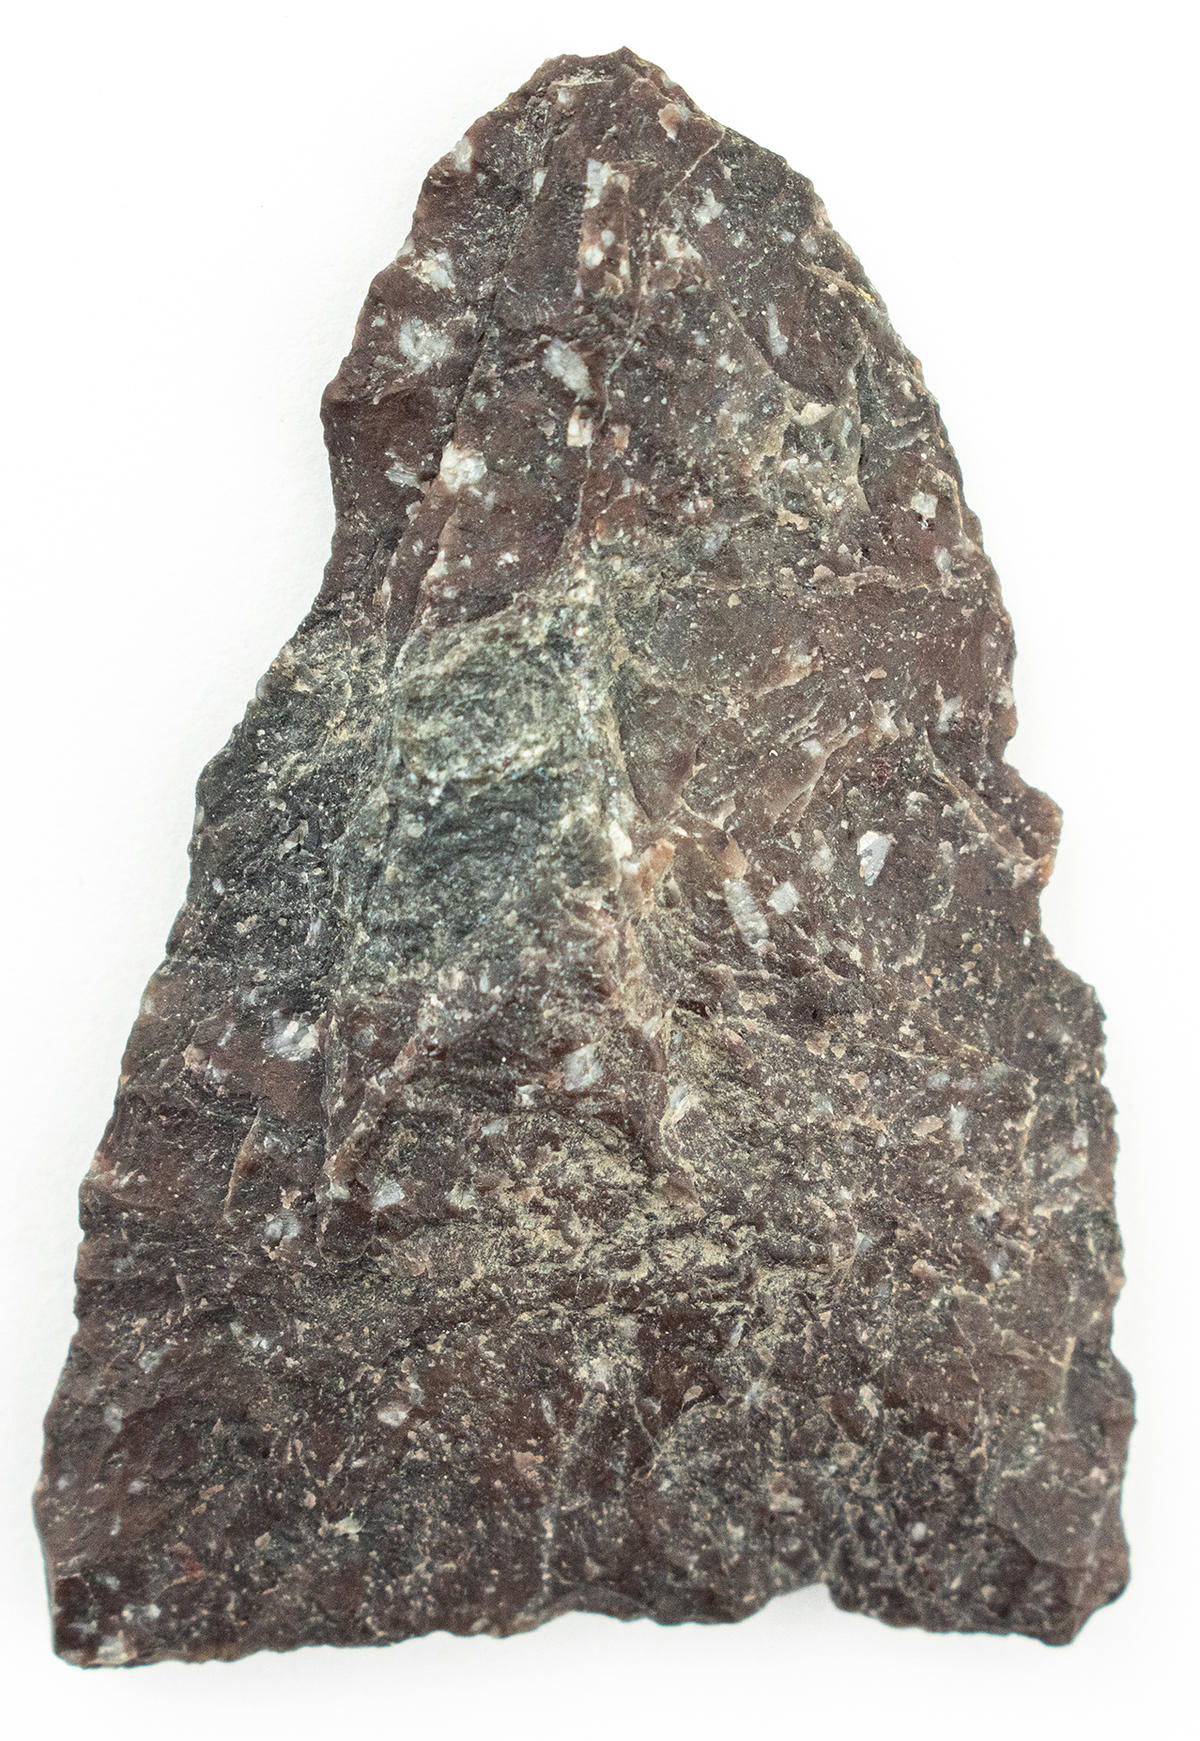 Close-up of a roughly triangular Native projectile point made from Lynn rhyolite, a deep reddish stone with white veins and phenocrysts.